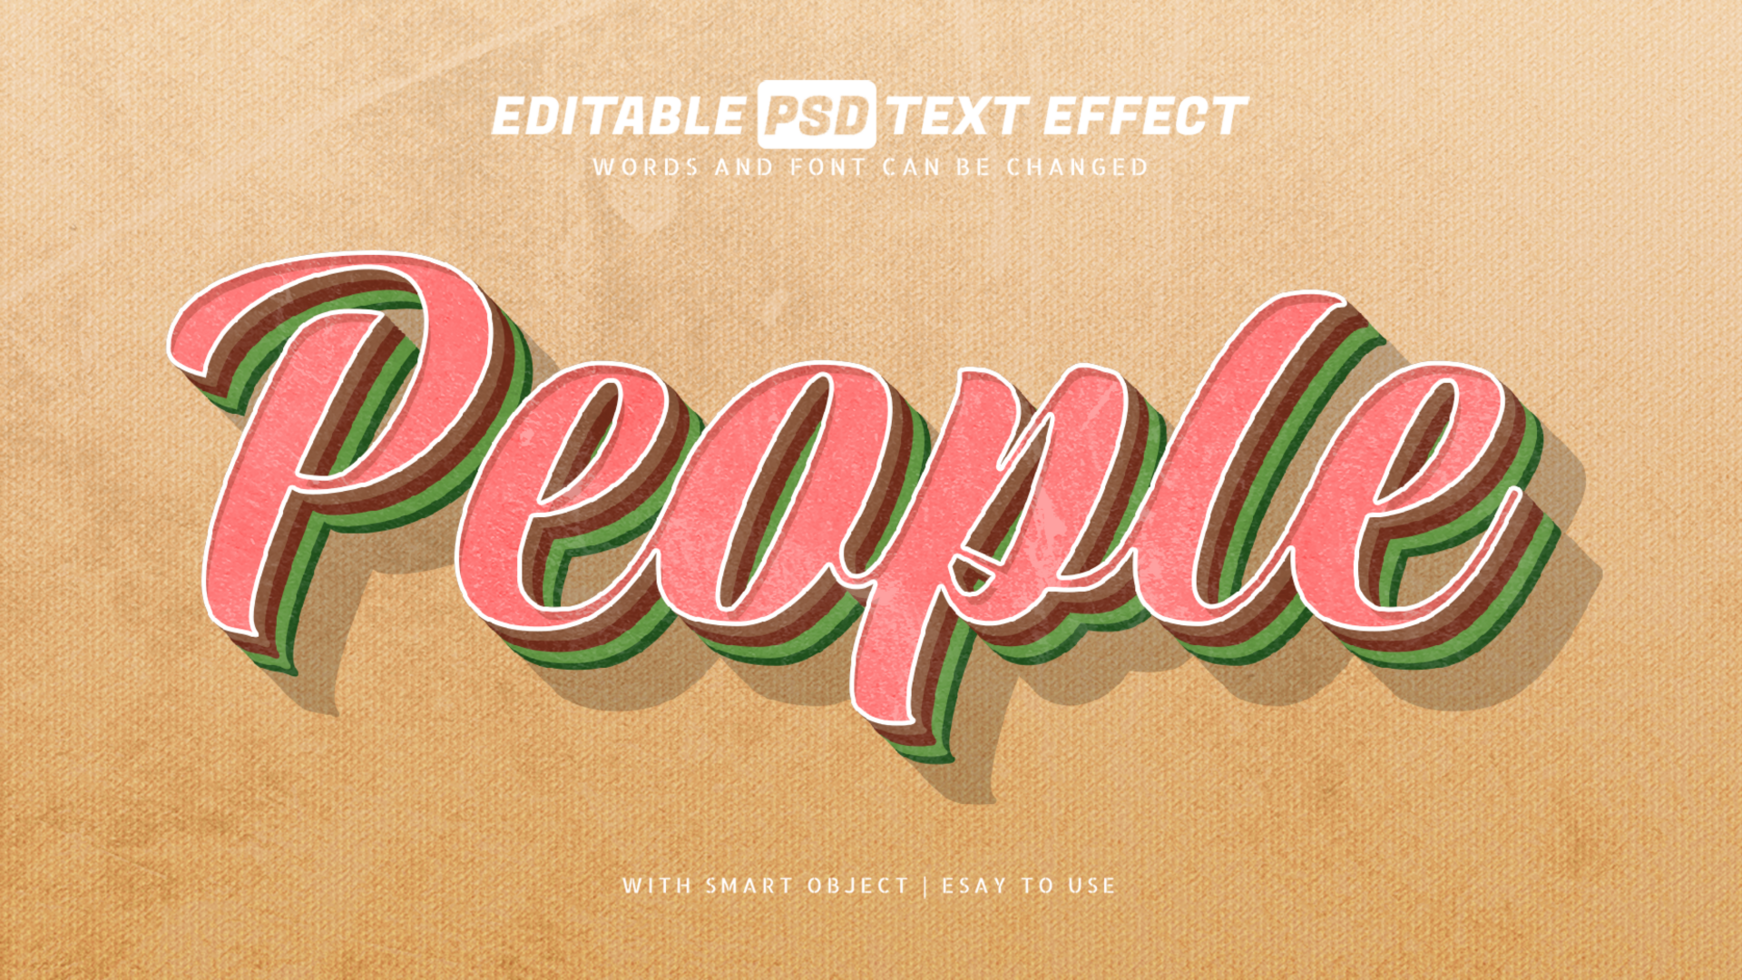 People retro vintage style text effect psd